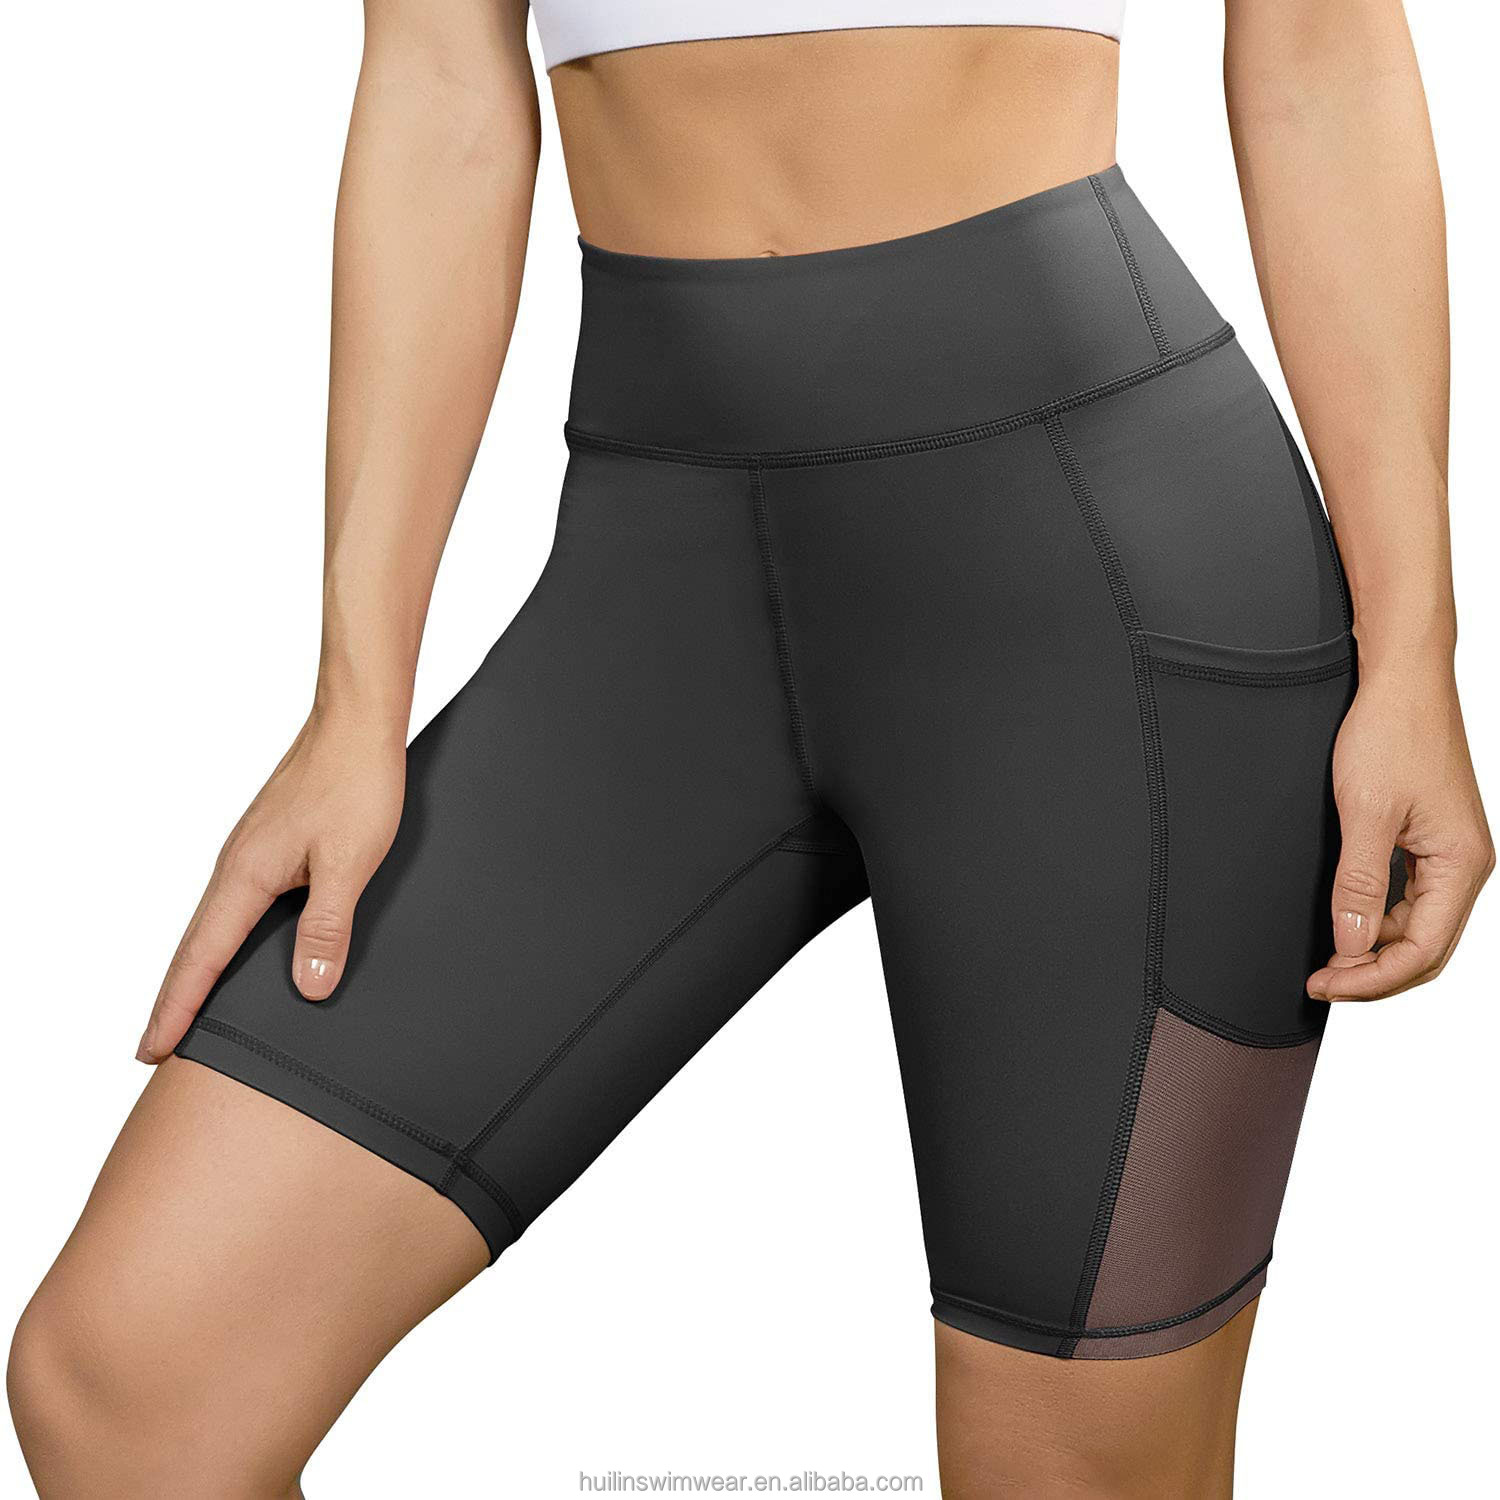 Big butt yoga pants have become a staple in many wardrobes, offering both comfort and style for various occasions.